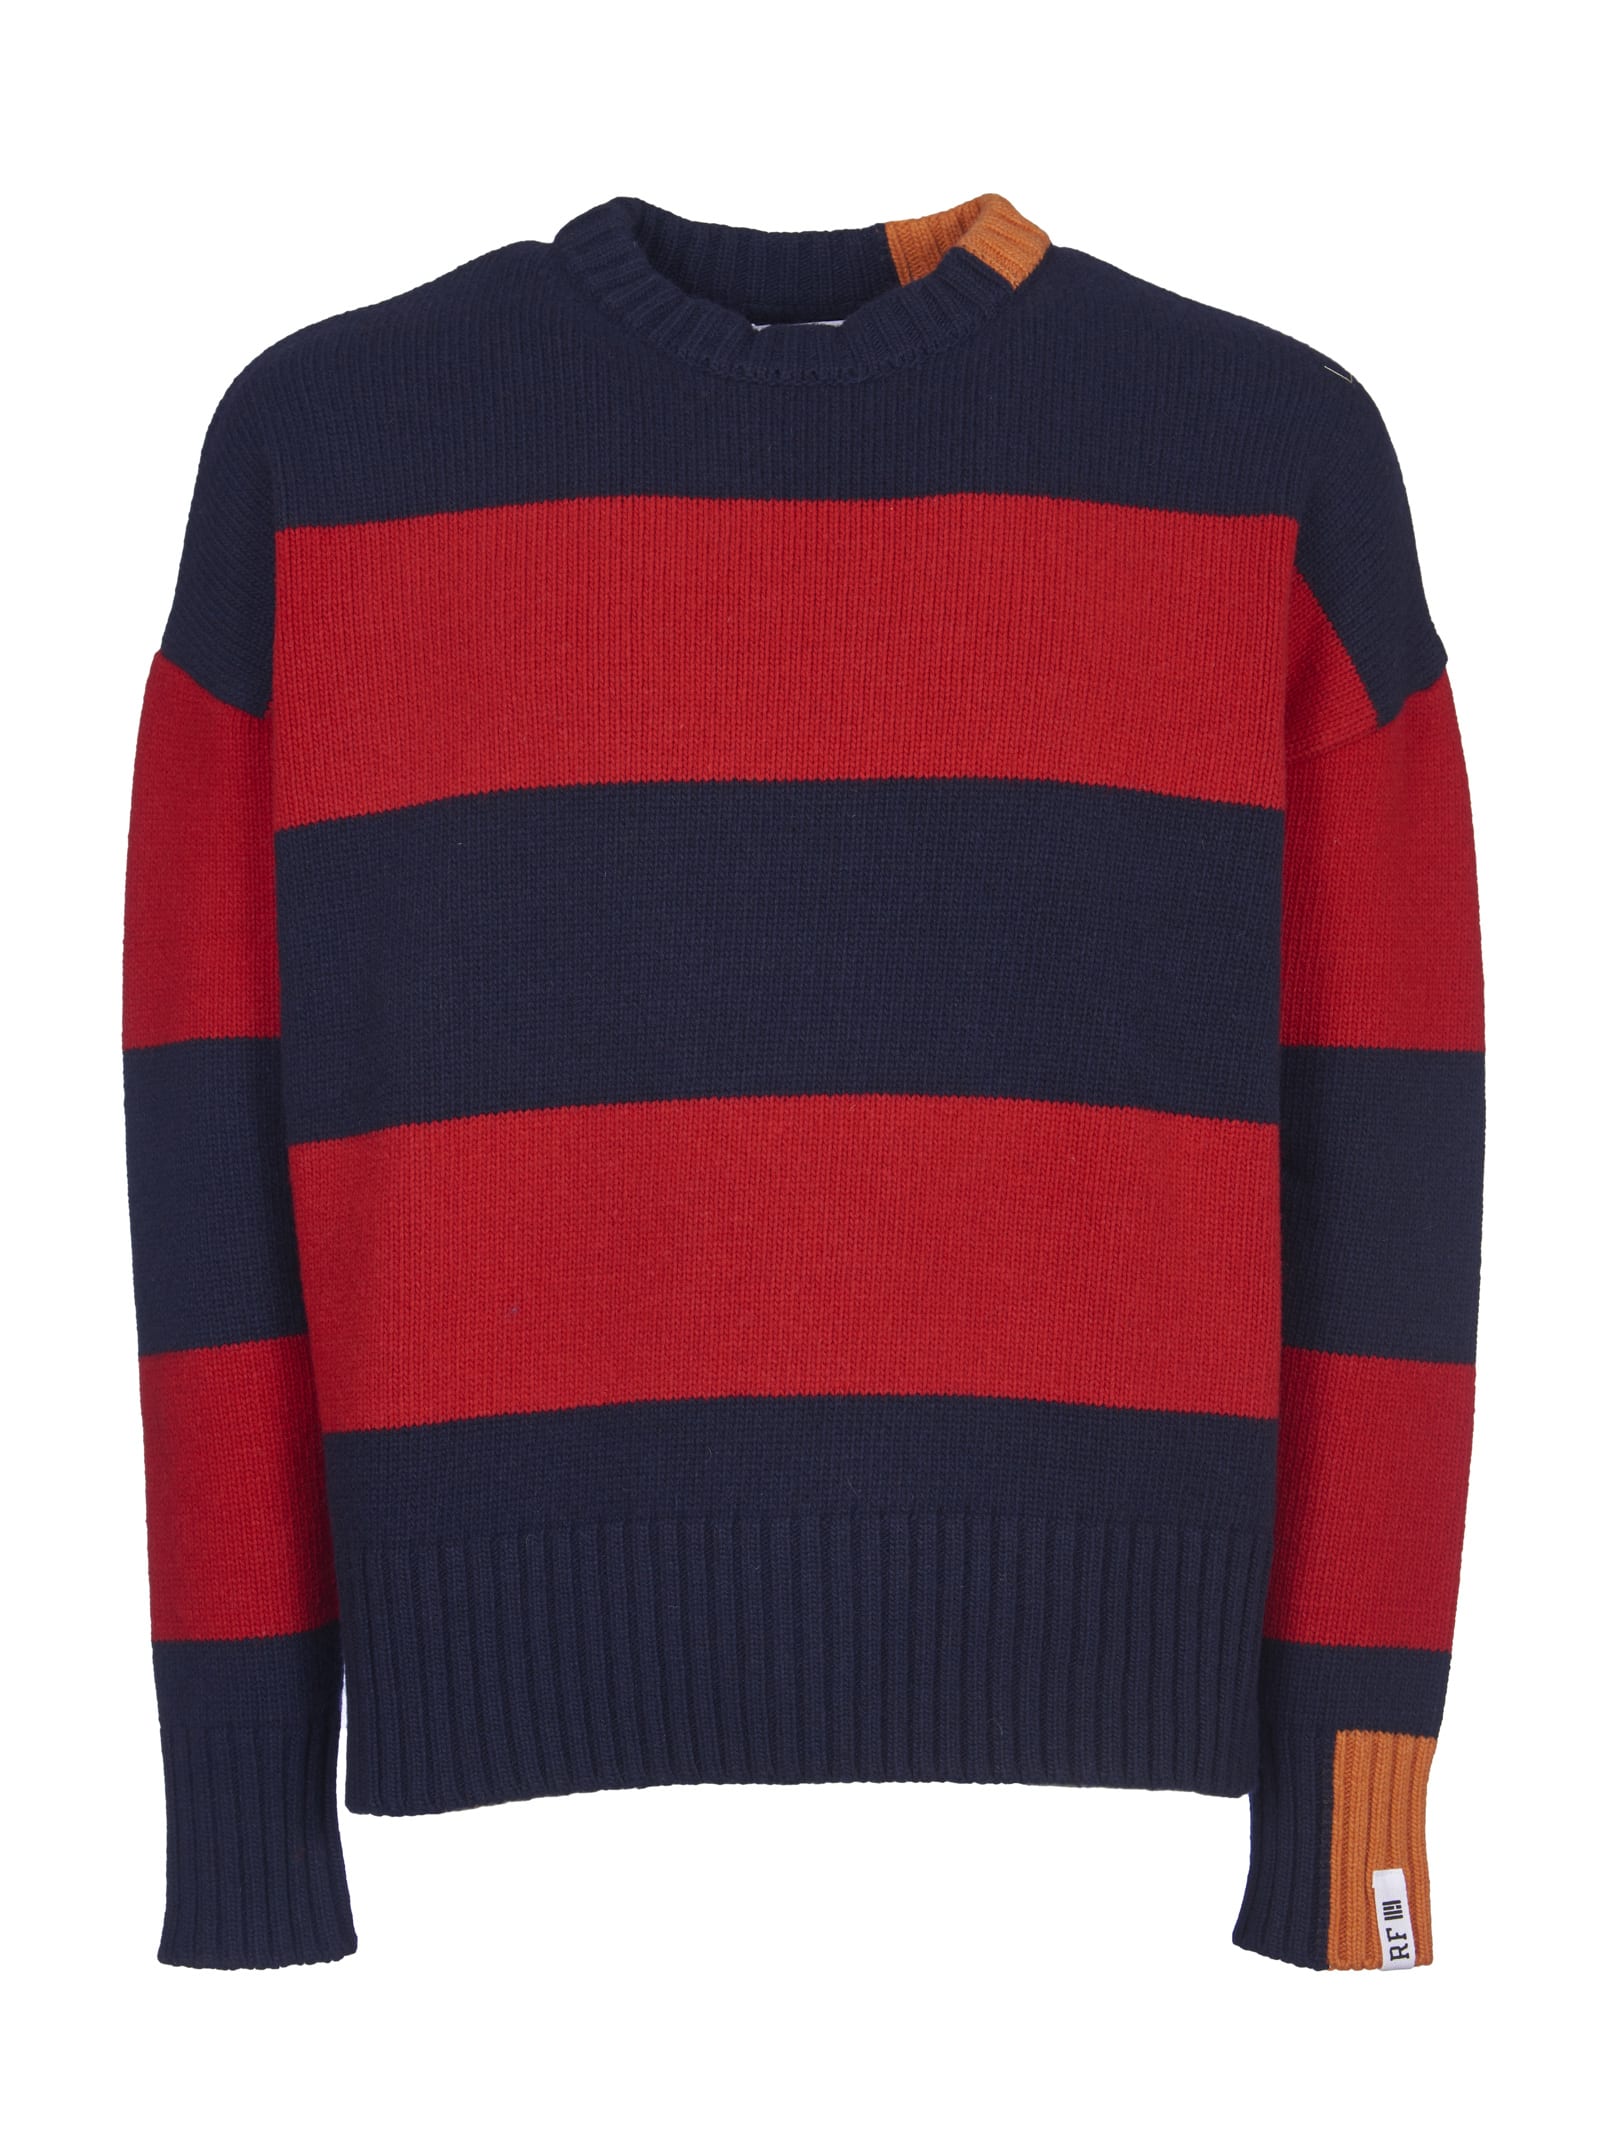 Right For Red And Blue Striped Sweater